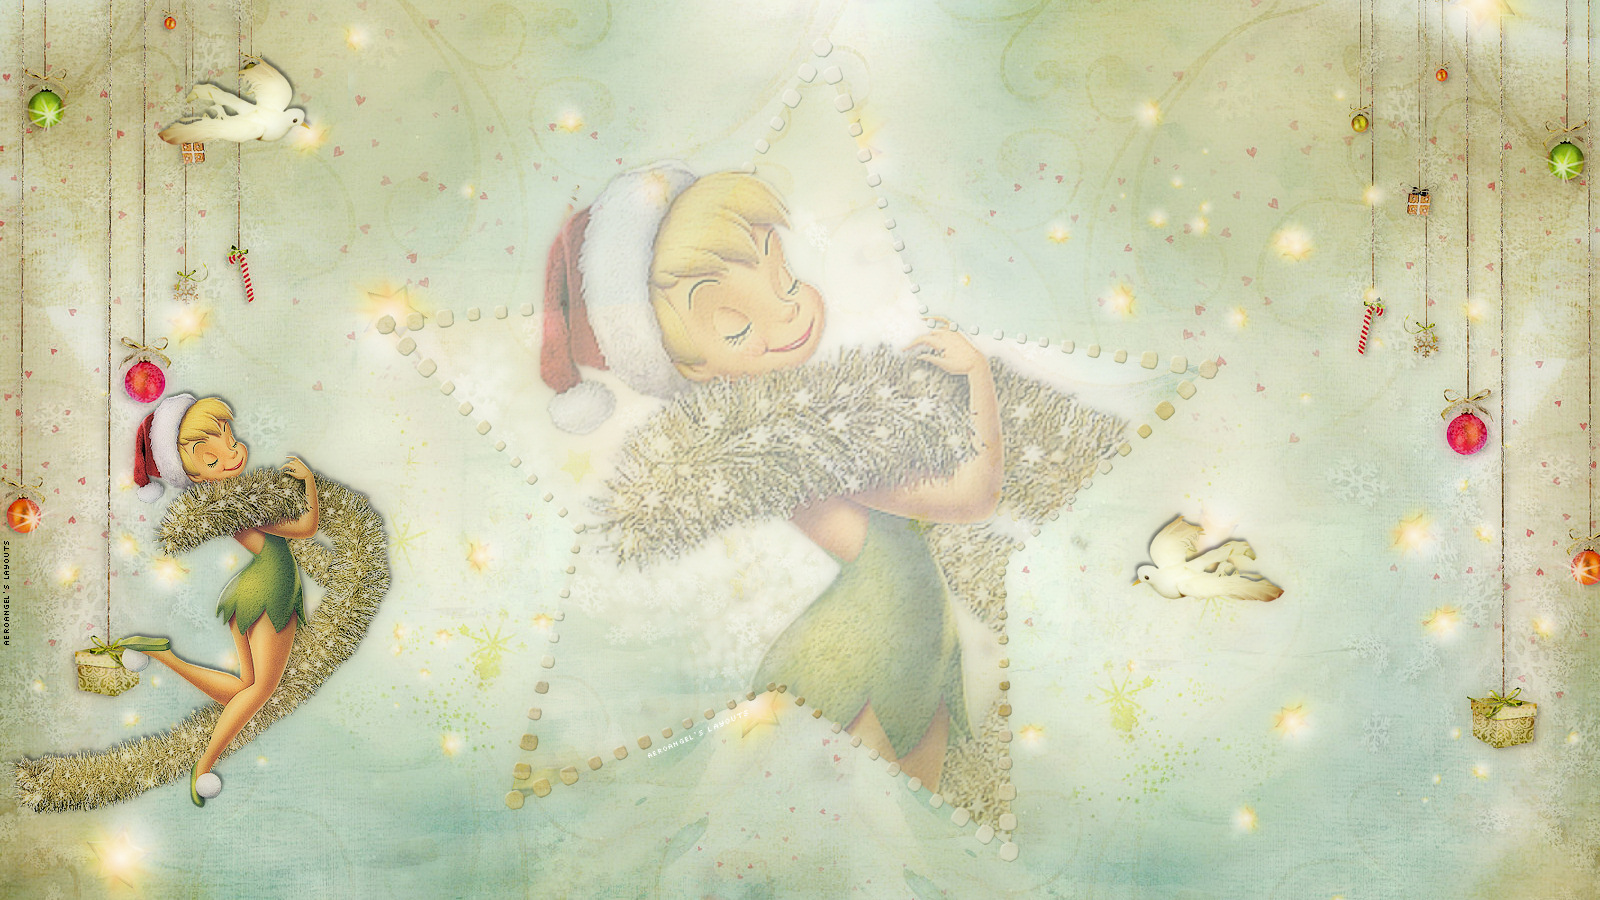 Tinkerbell Christmas Background